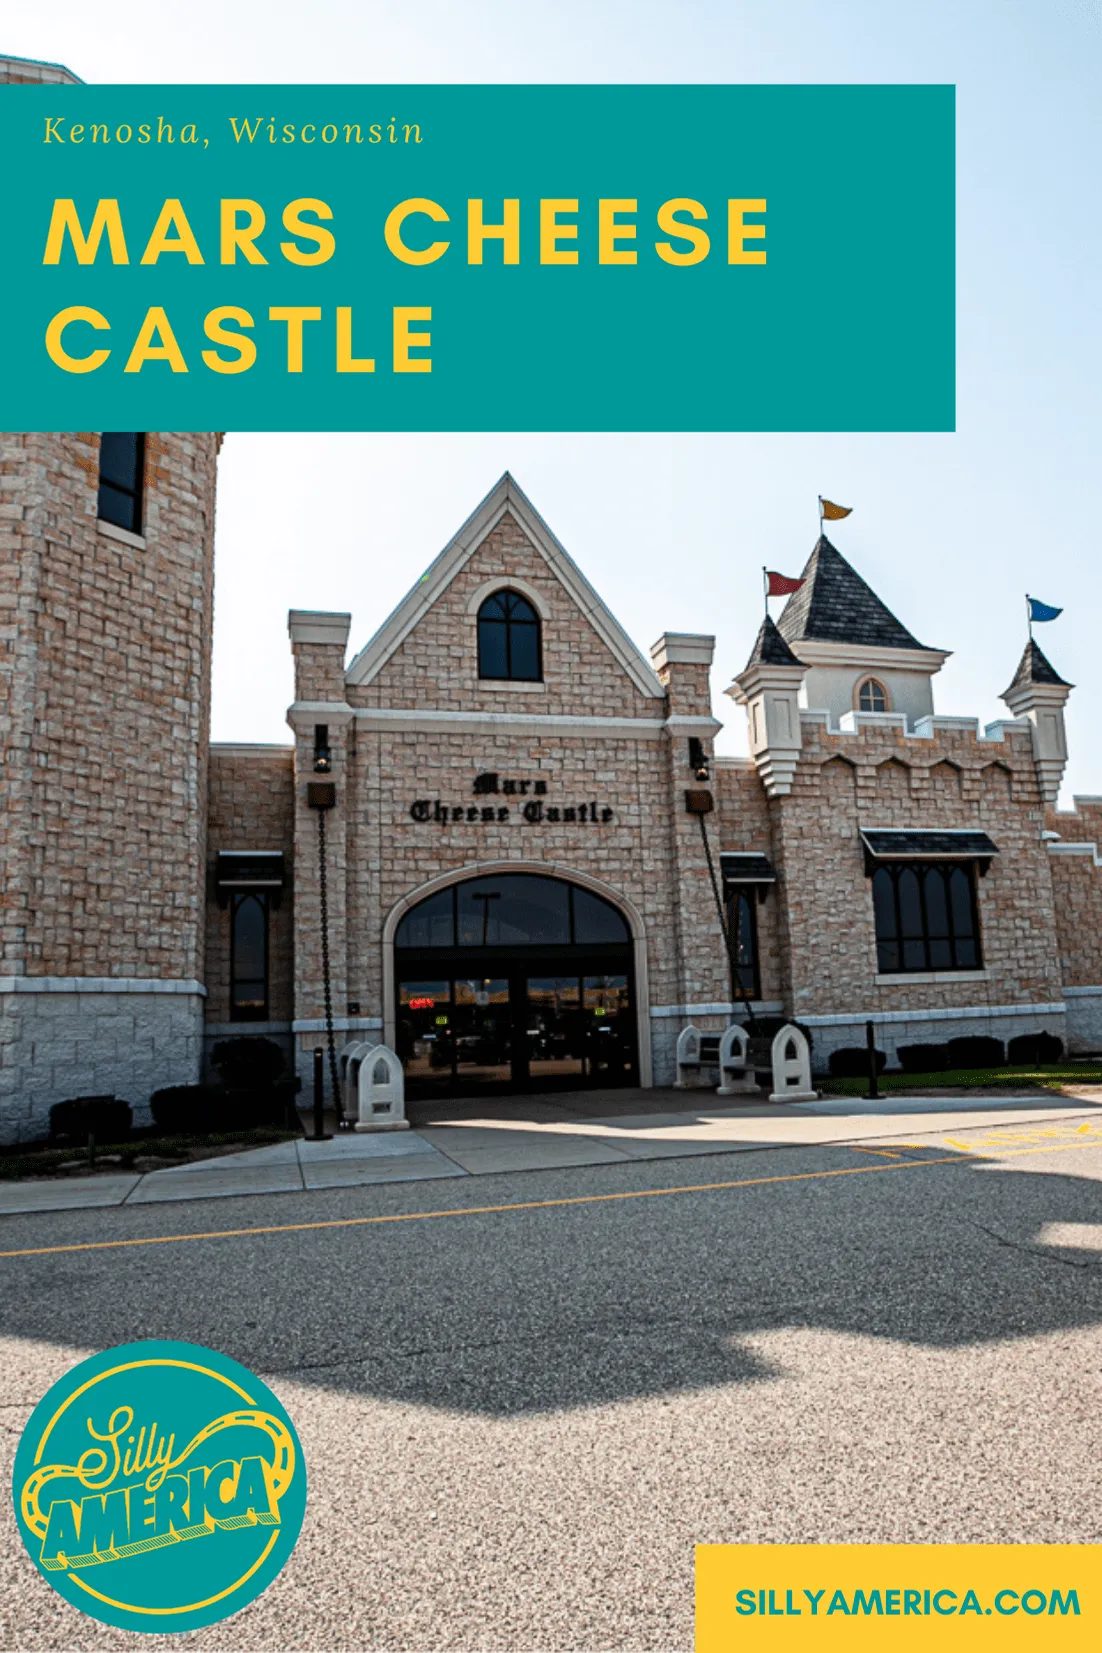 There's a castle in Wisconsin revered by locals and sought out from distinguished travelers from near and far. You guessed it, this Wisconsin tourist attraction can only be the one and only Mars Cheese Castle. Mars Cheese Castle is a cheesy tourist attraction and Wisconsin cheese shop shaped like a castle off if Interstate 94.  #WisconsinRoadsideAttractions #WisconsinRoadsideAttraction #RoadsideAttractions #RoadsideAttraction #RoadTrip #WisconsinRoadTrip  #ThingsToDoInWisconsin